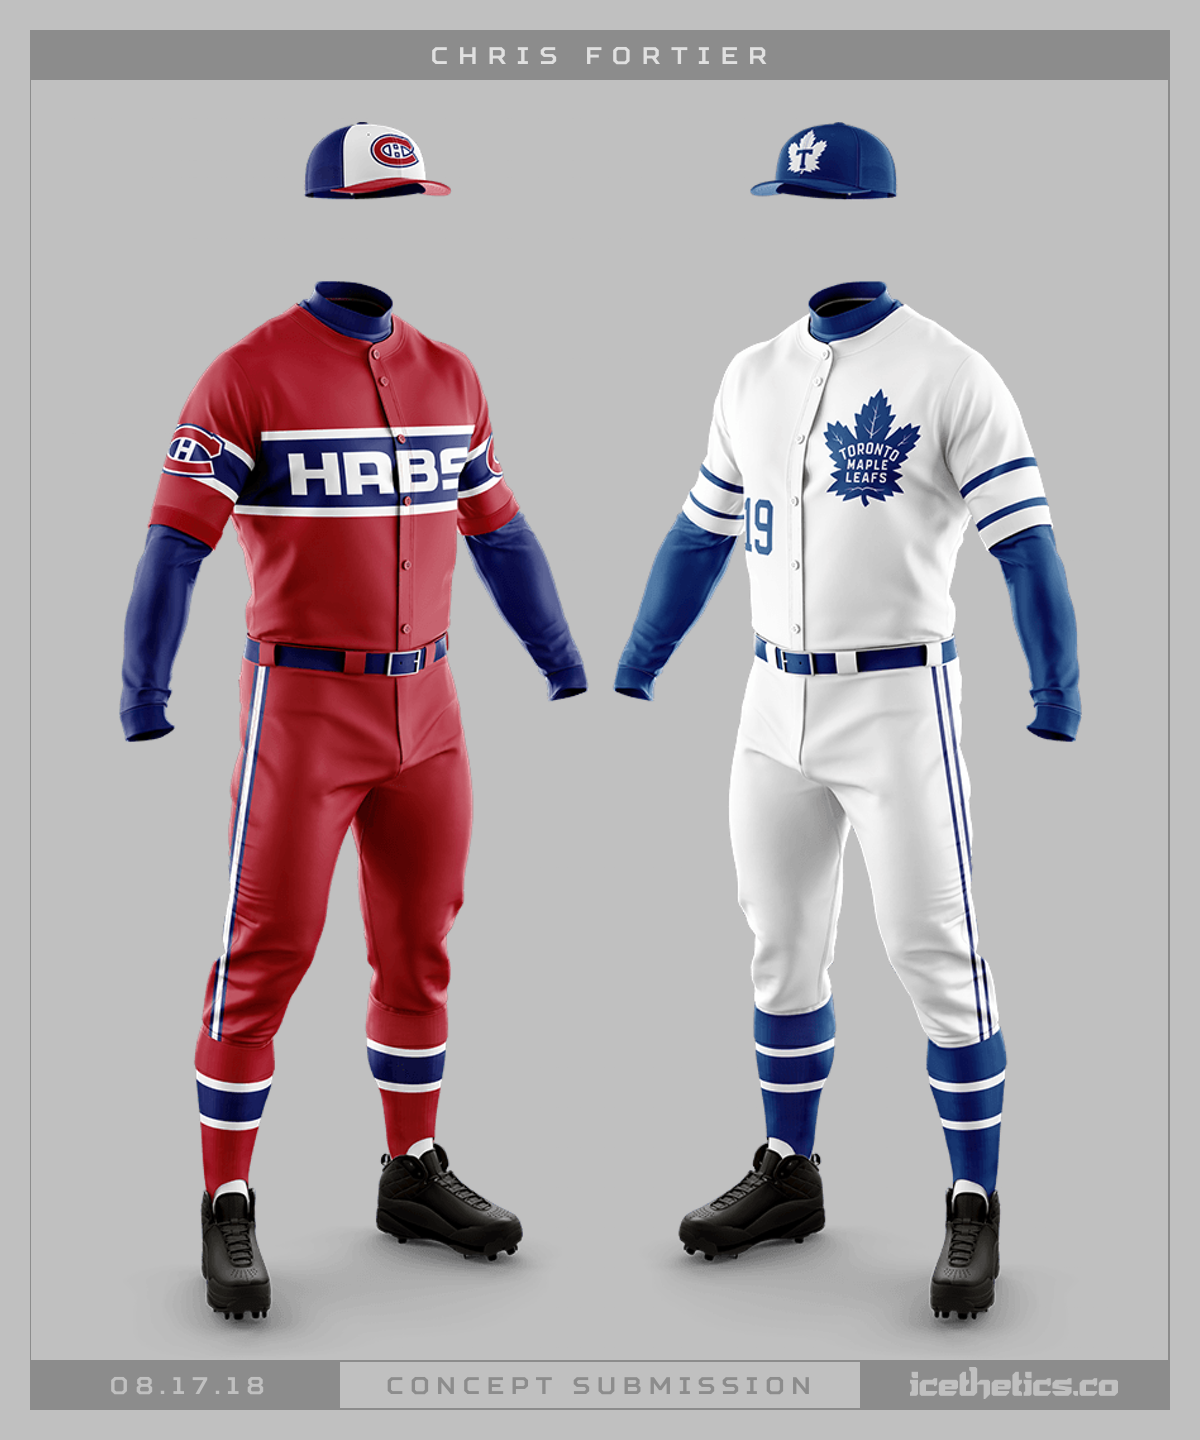 Toronto Maple Leafs - Concept Jersey Set : r/leafs